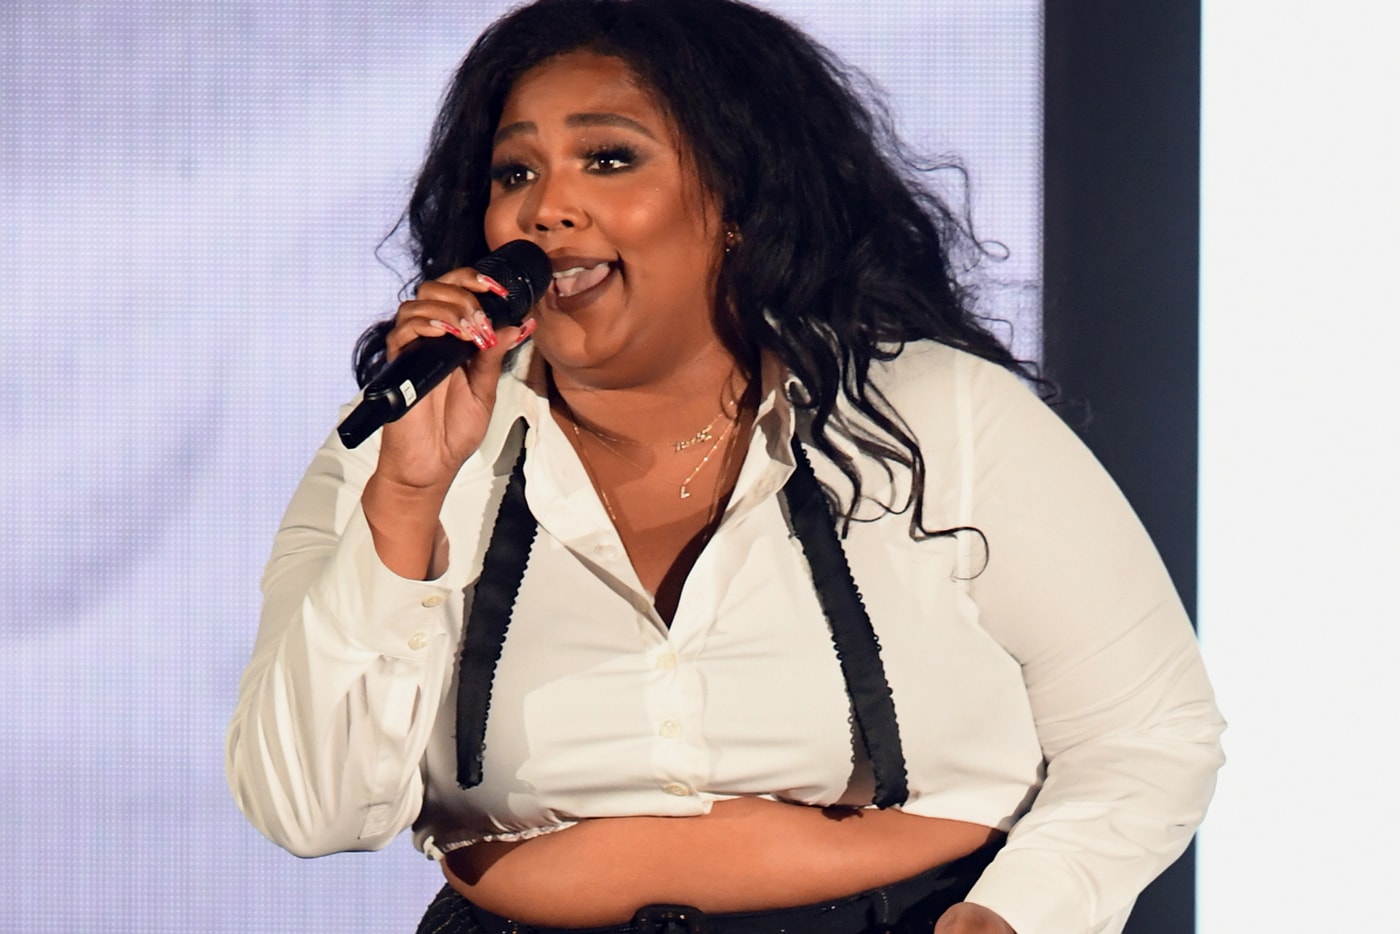 Lizzo "Truth Hurts" & "Juice" Plagiarism Accusations CeCe Peniston "Finally" adlibs Justin Raisen “I just took a DNA test, turns out I’m 100 percent that bitch,”